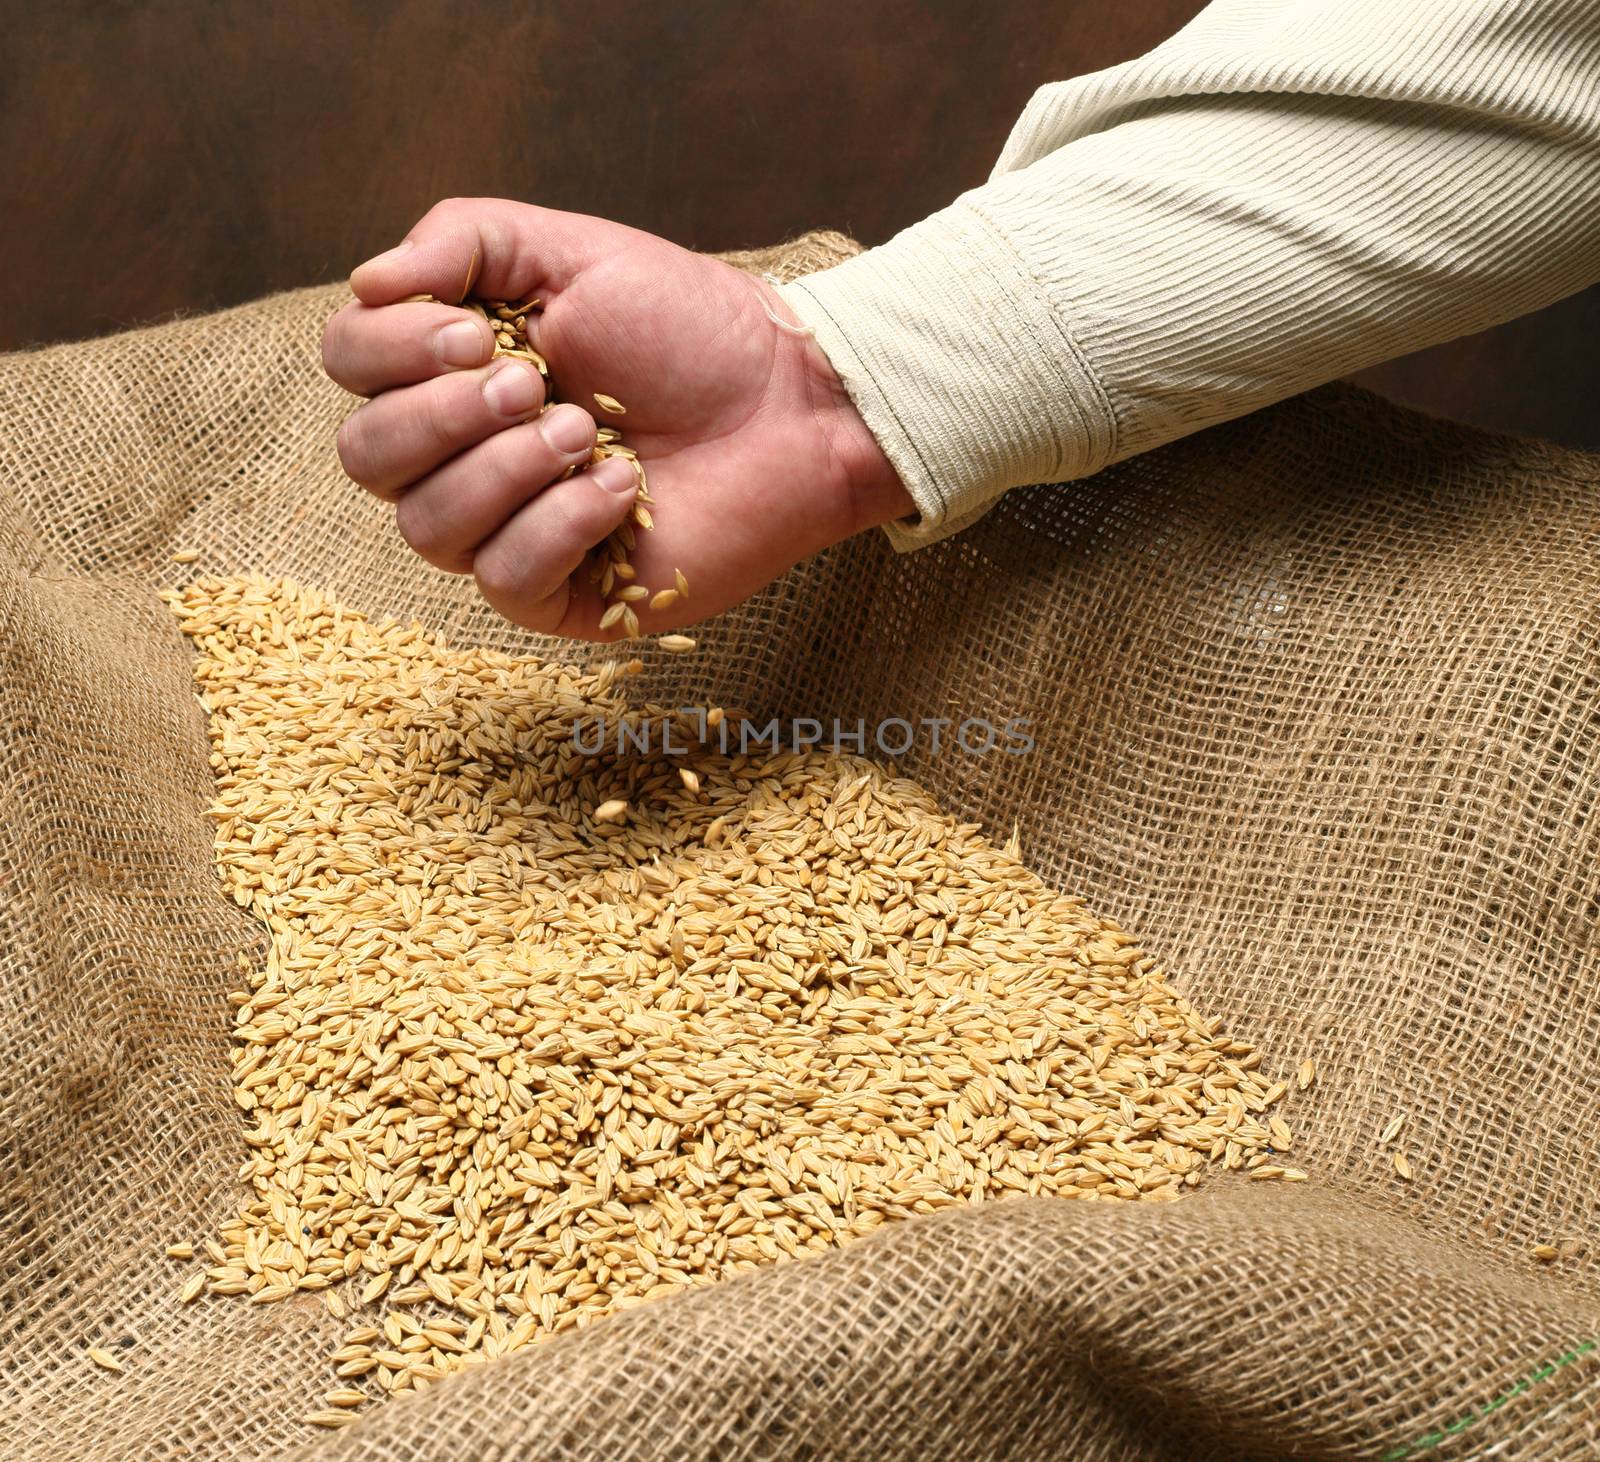  wheat sowing seed in man's hand